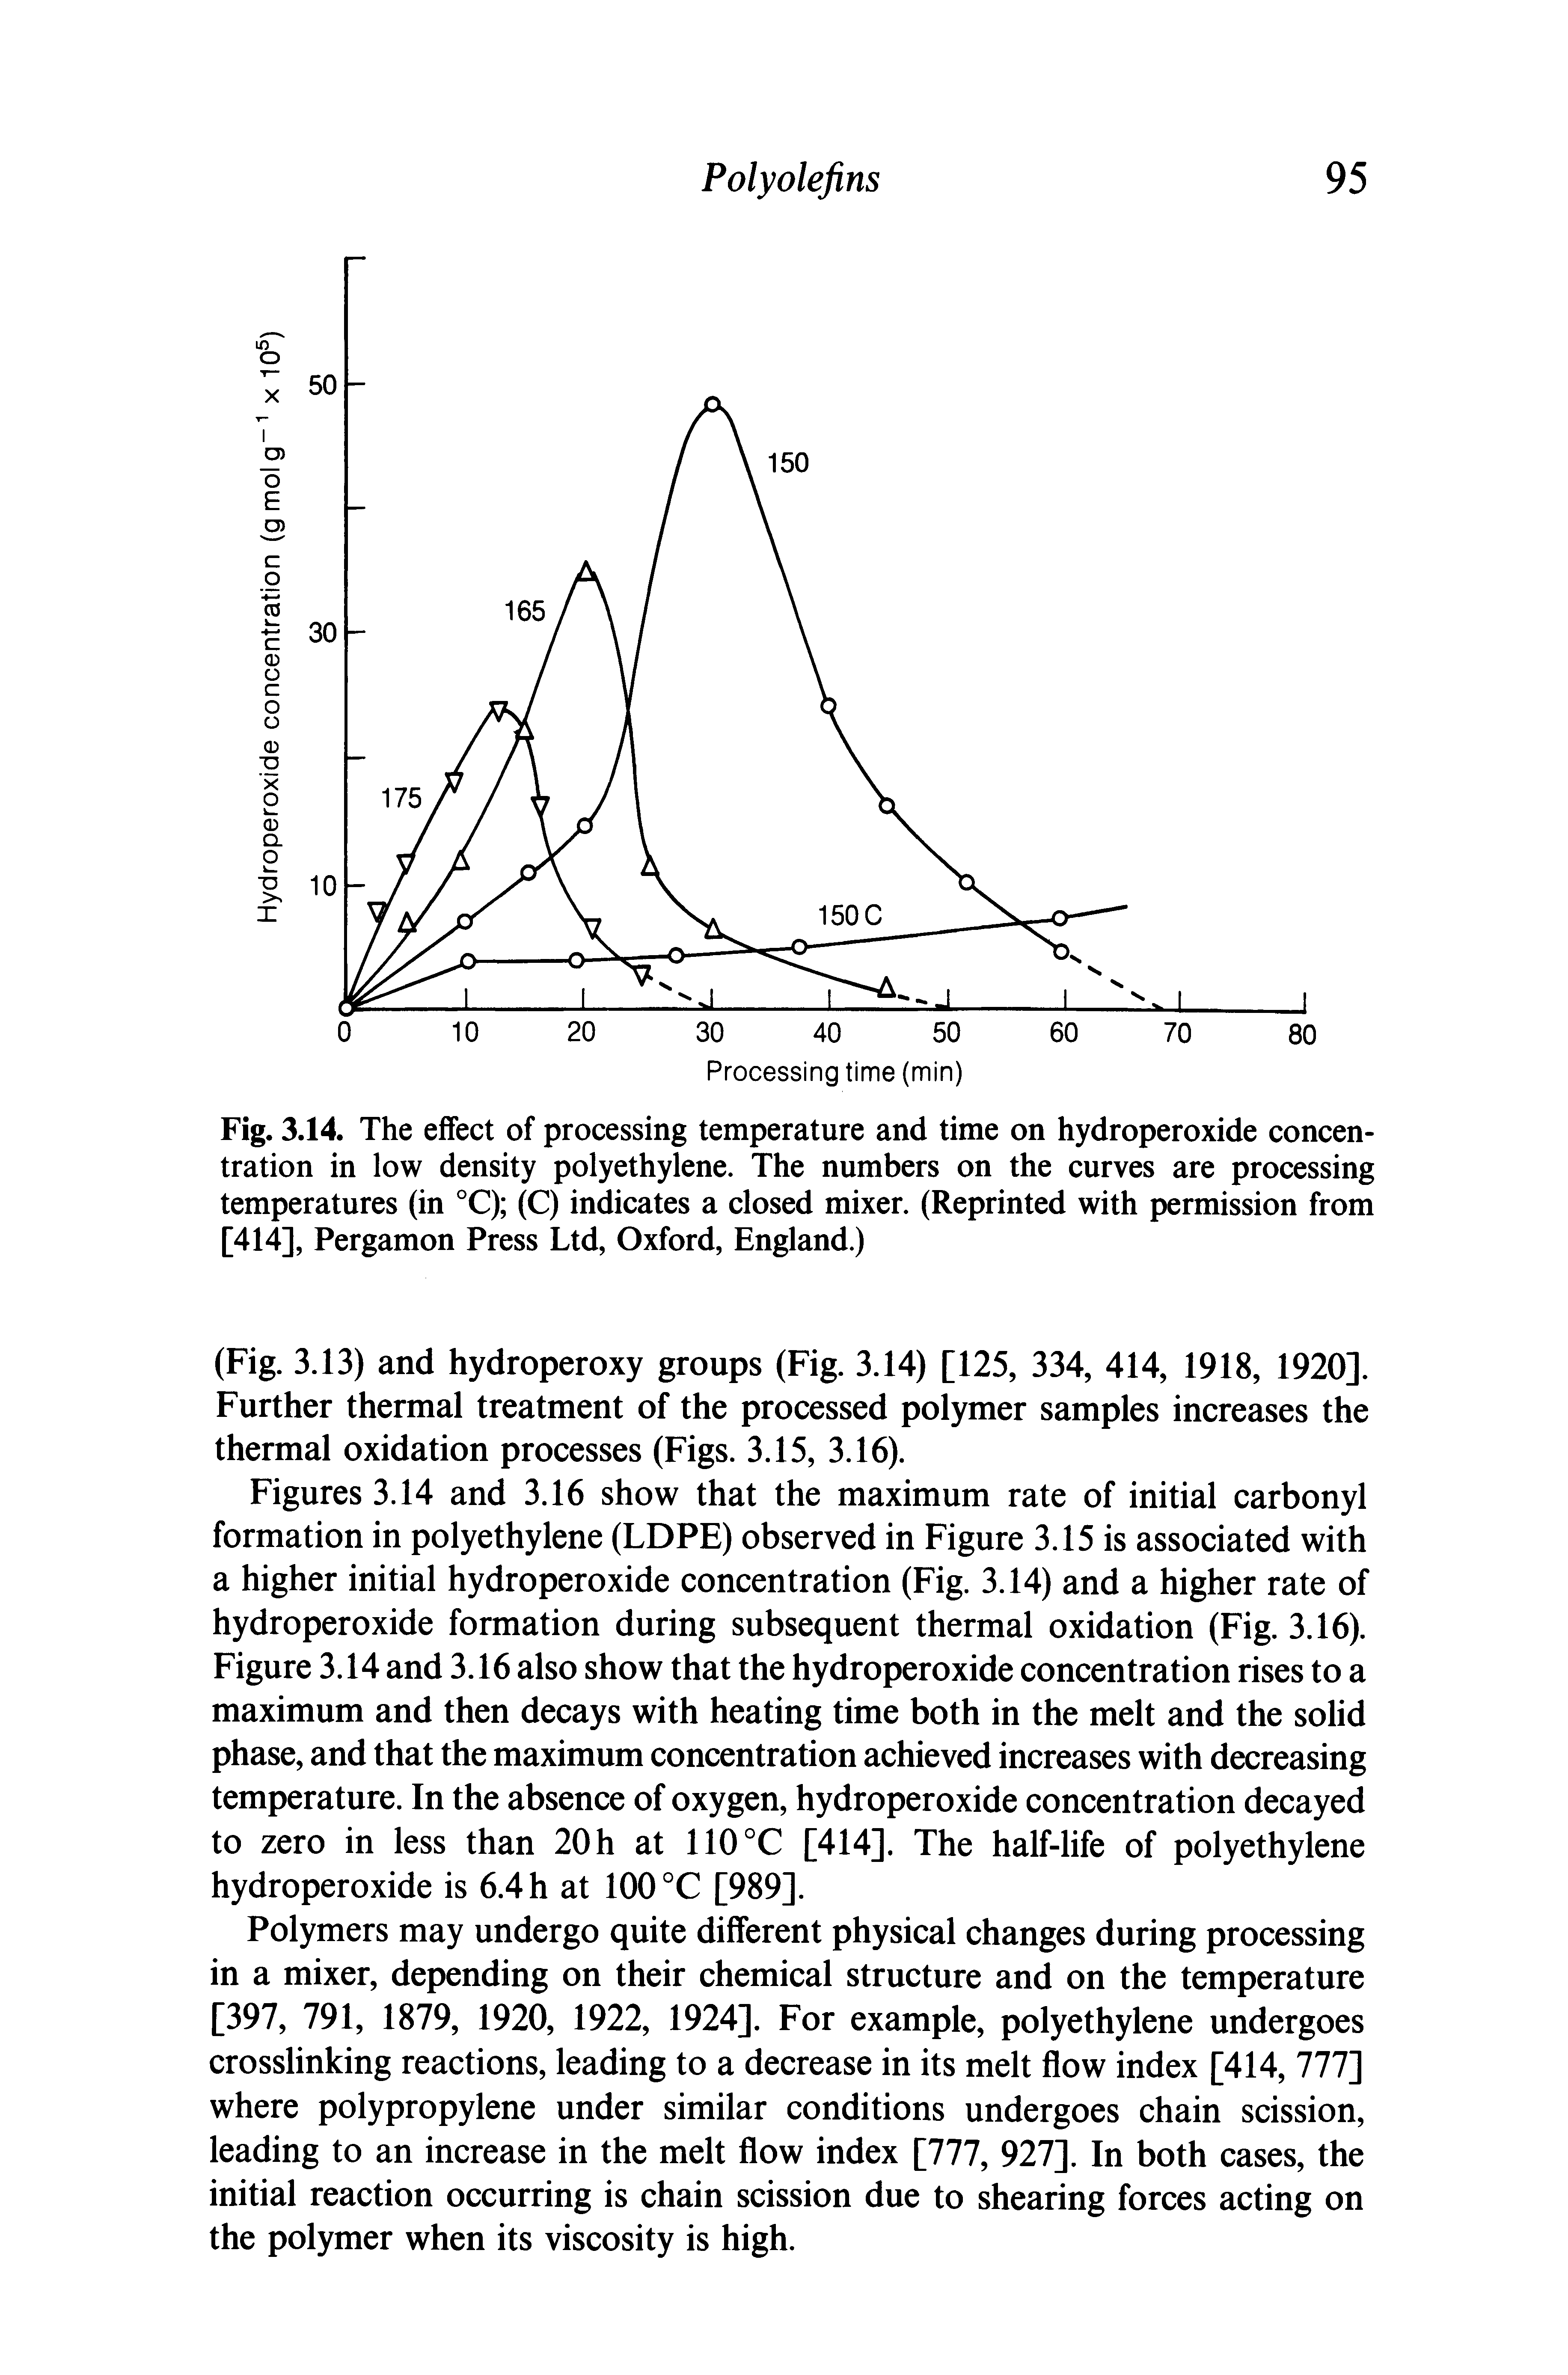 Figures 3.14 and 3.16 show that the maximum rate of initial carbonyl formation in polyethylene (LDPE) observed in Figure 3.15 is associated with a higher initial hydroperoxide concentration (Fig. 3.14) and a higher rate of hydroperoxide formation during subsequent thermal oxidation (Fig. 3.16). Figure 3.14 and 3.16 also show that the hydroperoxide concentration rises to a maximum and then decays with heating time both in the melt and the solid phase, and that the maximum concentration achieved increases with decreasing temperature. In the absence of oxygen, hydroperoxide concentration decayed to zero in less than 20 h at 110°C [414]. The half-life of polyethylene hydroperoxide is 6.4 h at 100 °C [989].